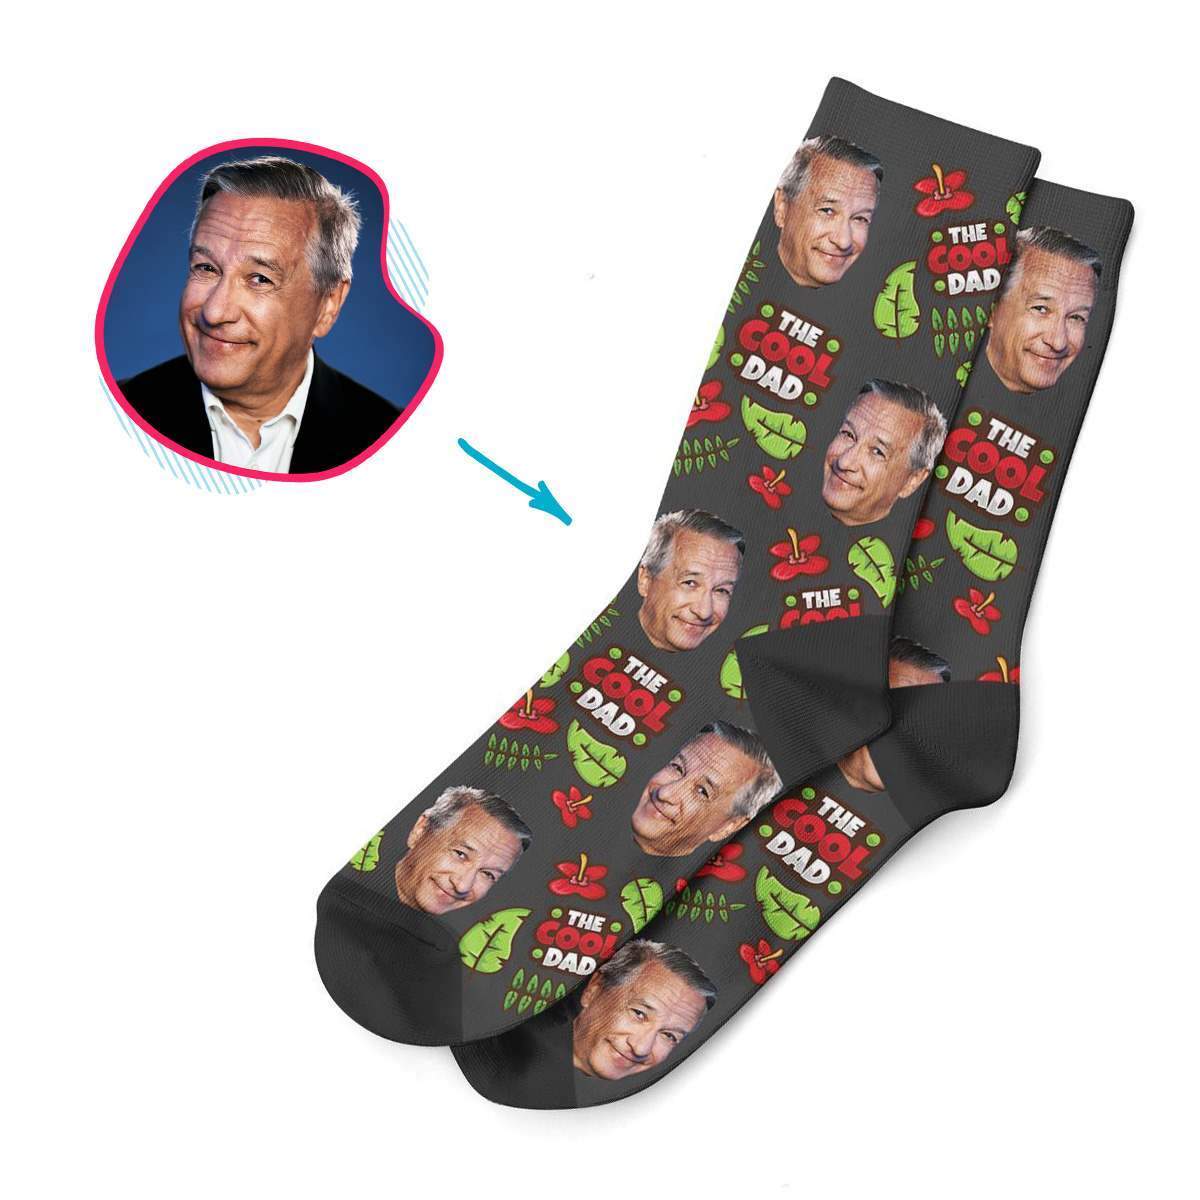 dark The Cool Dad socks personalized with photo of face printed on them